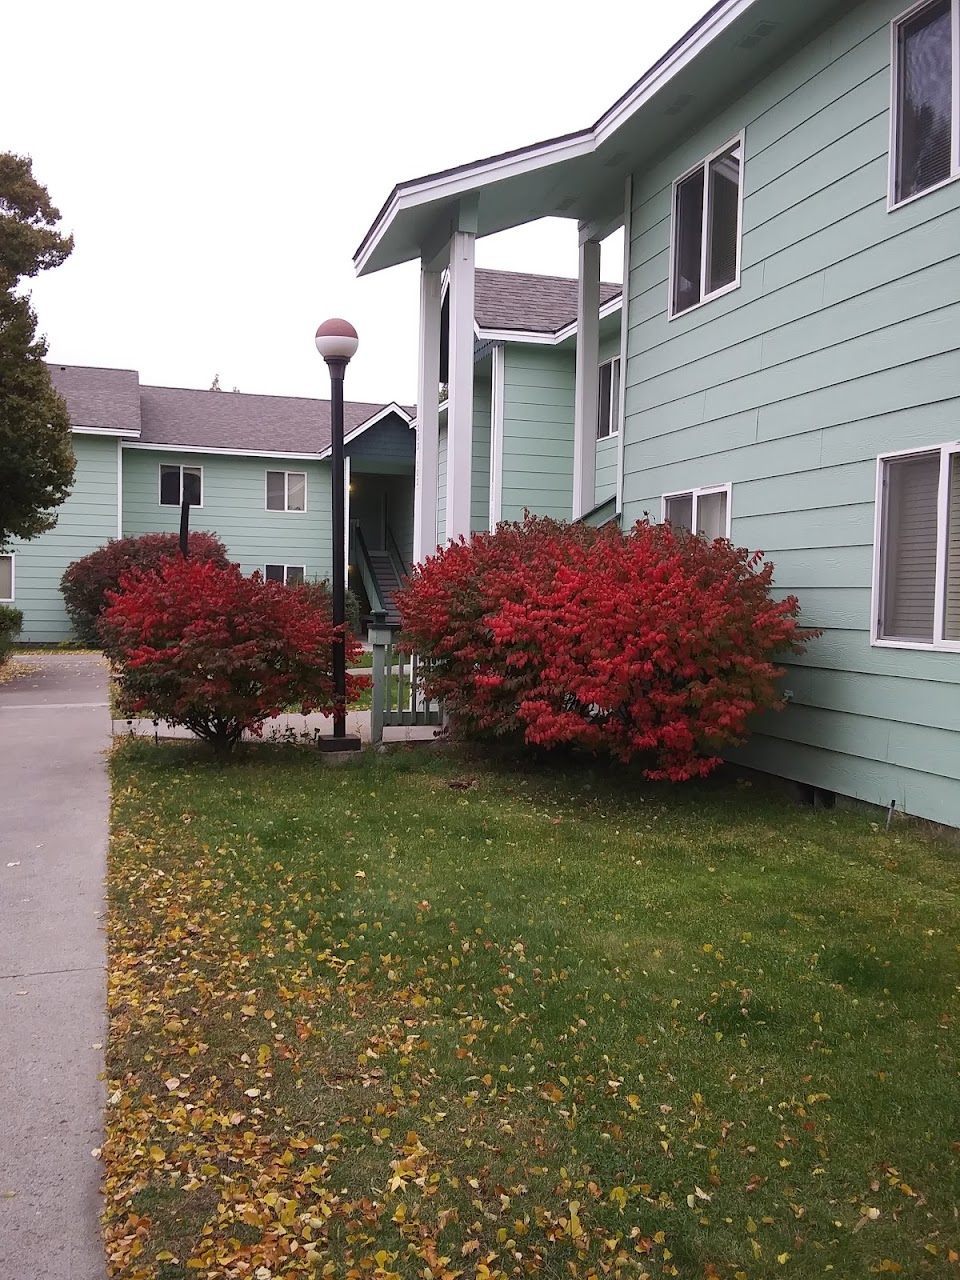 Photo of WHISPERING RIVERS APARTMENTS. Affordable housing located at 209 CANYON ST TWISP, WA 98856